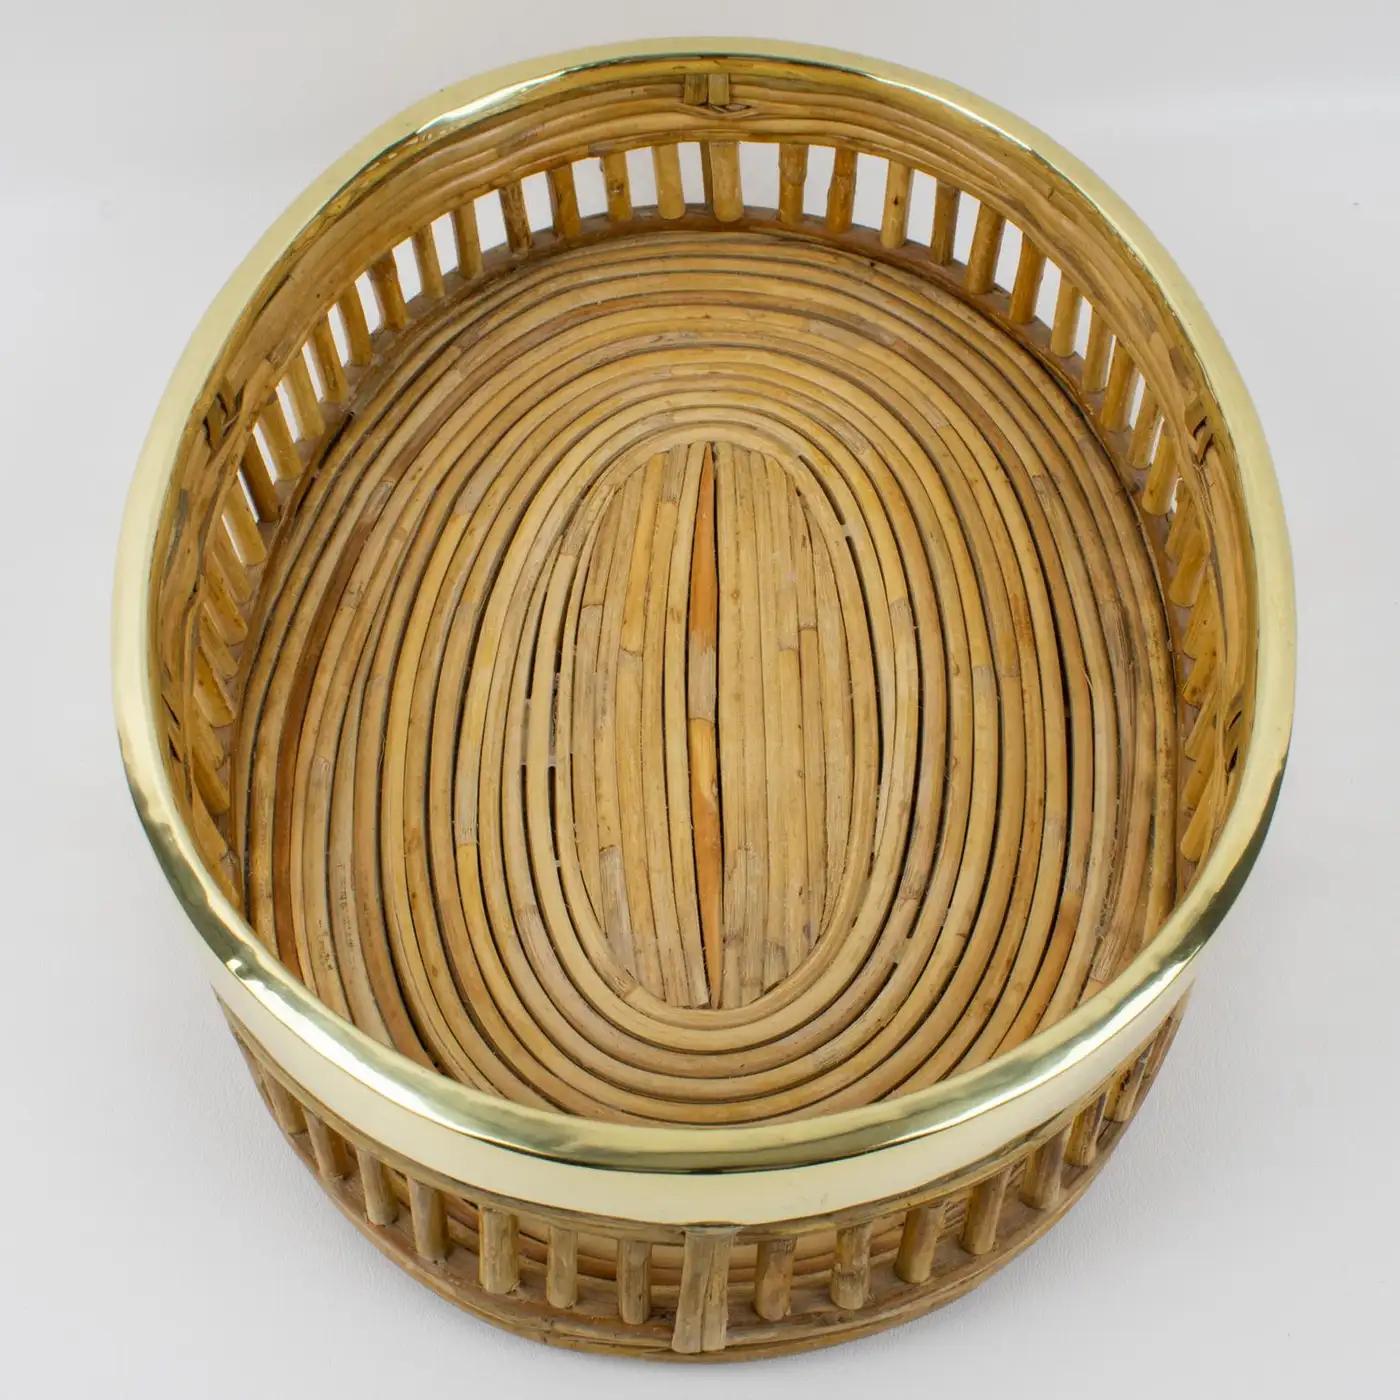 Rattan Bamboo Wicker and Brass Bowl Basket Centerpiece, Italy 1960s In Good Condition For Sale In Atlanta, GA